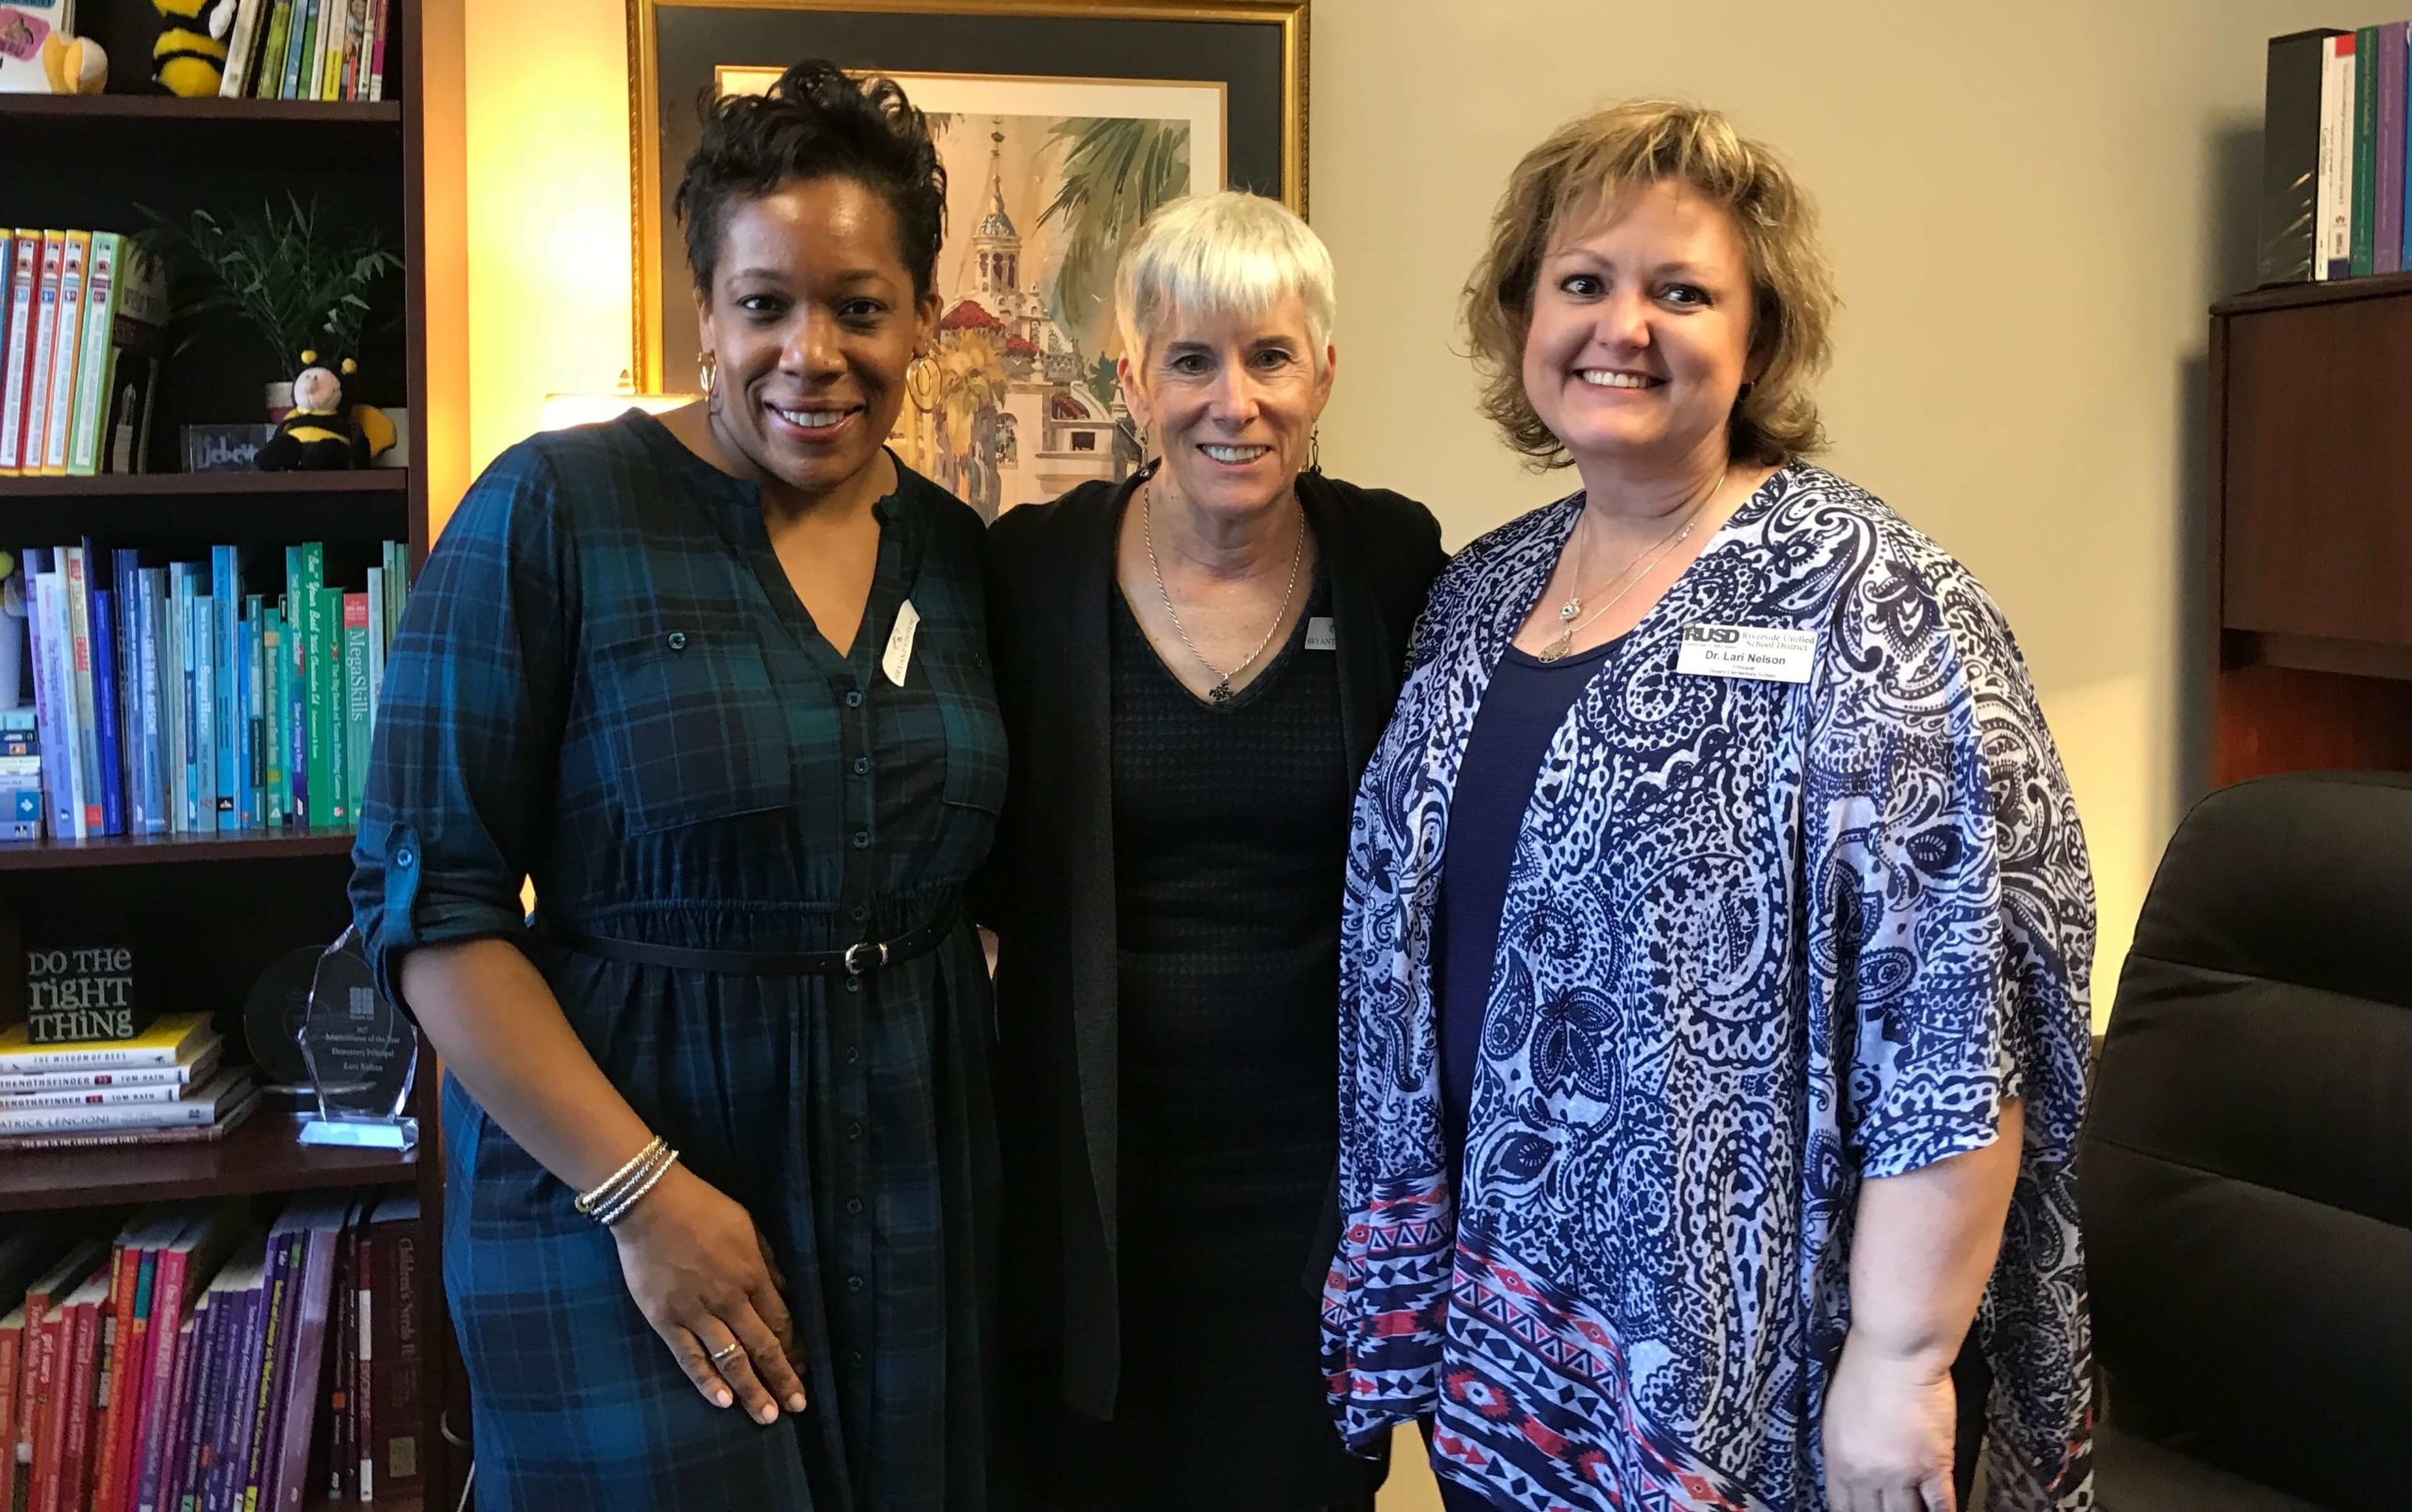 You don’t have a great school without strong instructional leadership – and principal Lari Nelson is as good as it gets.  Pictured here with Rachel Etienne and Barbara Davidson of the Knowledge Matters Campaign.